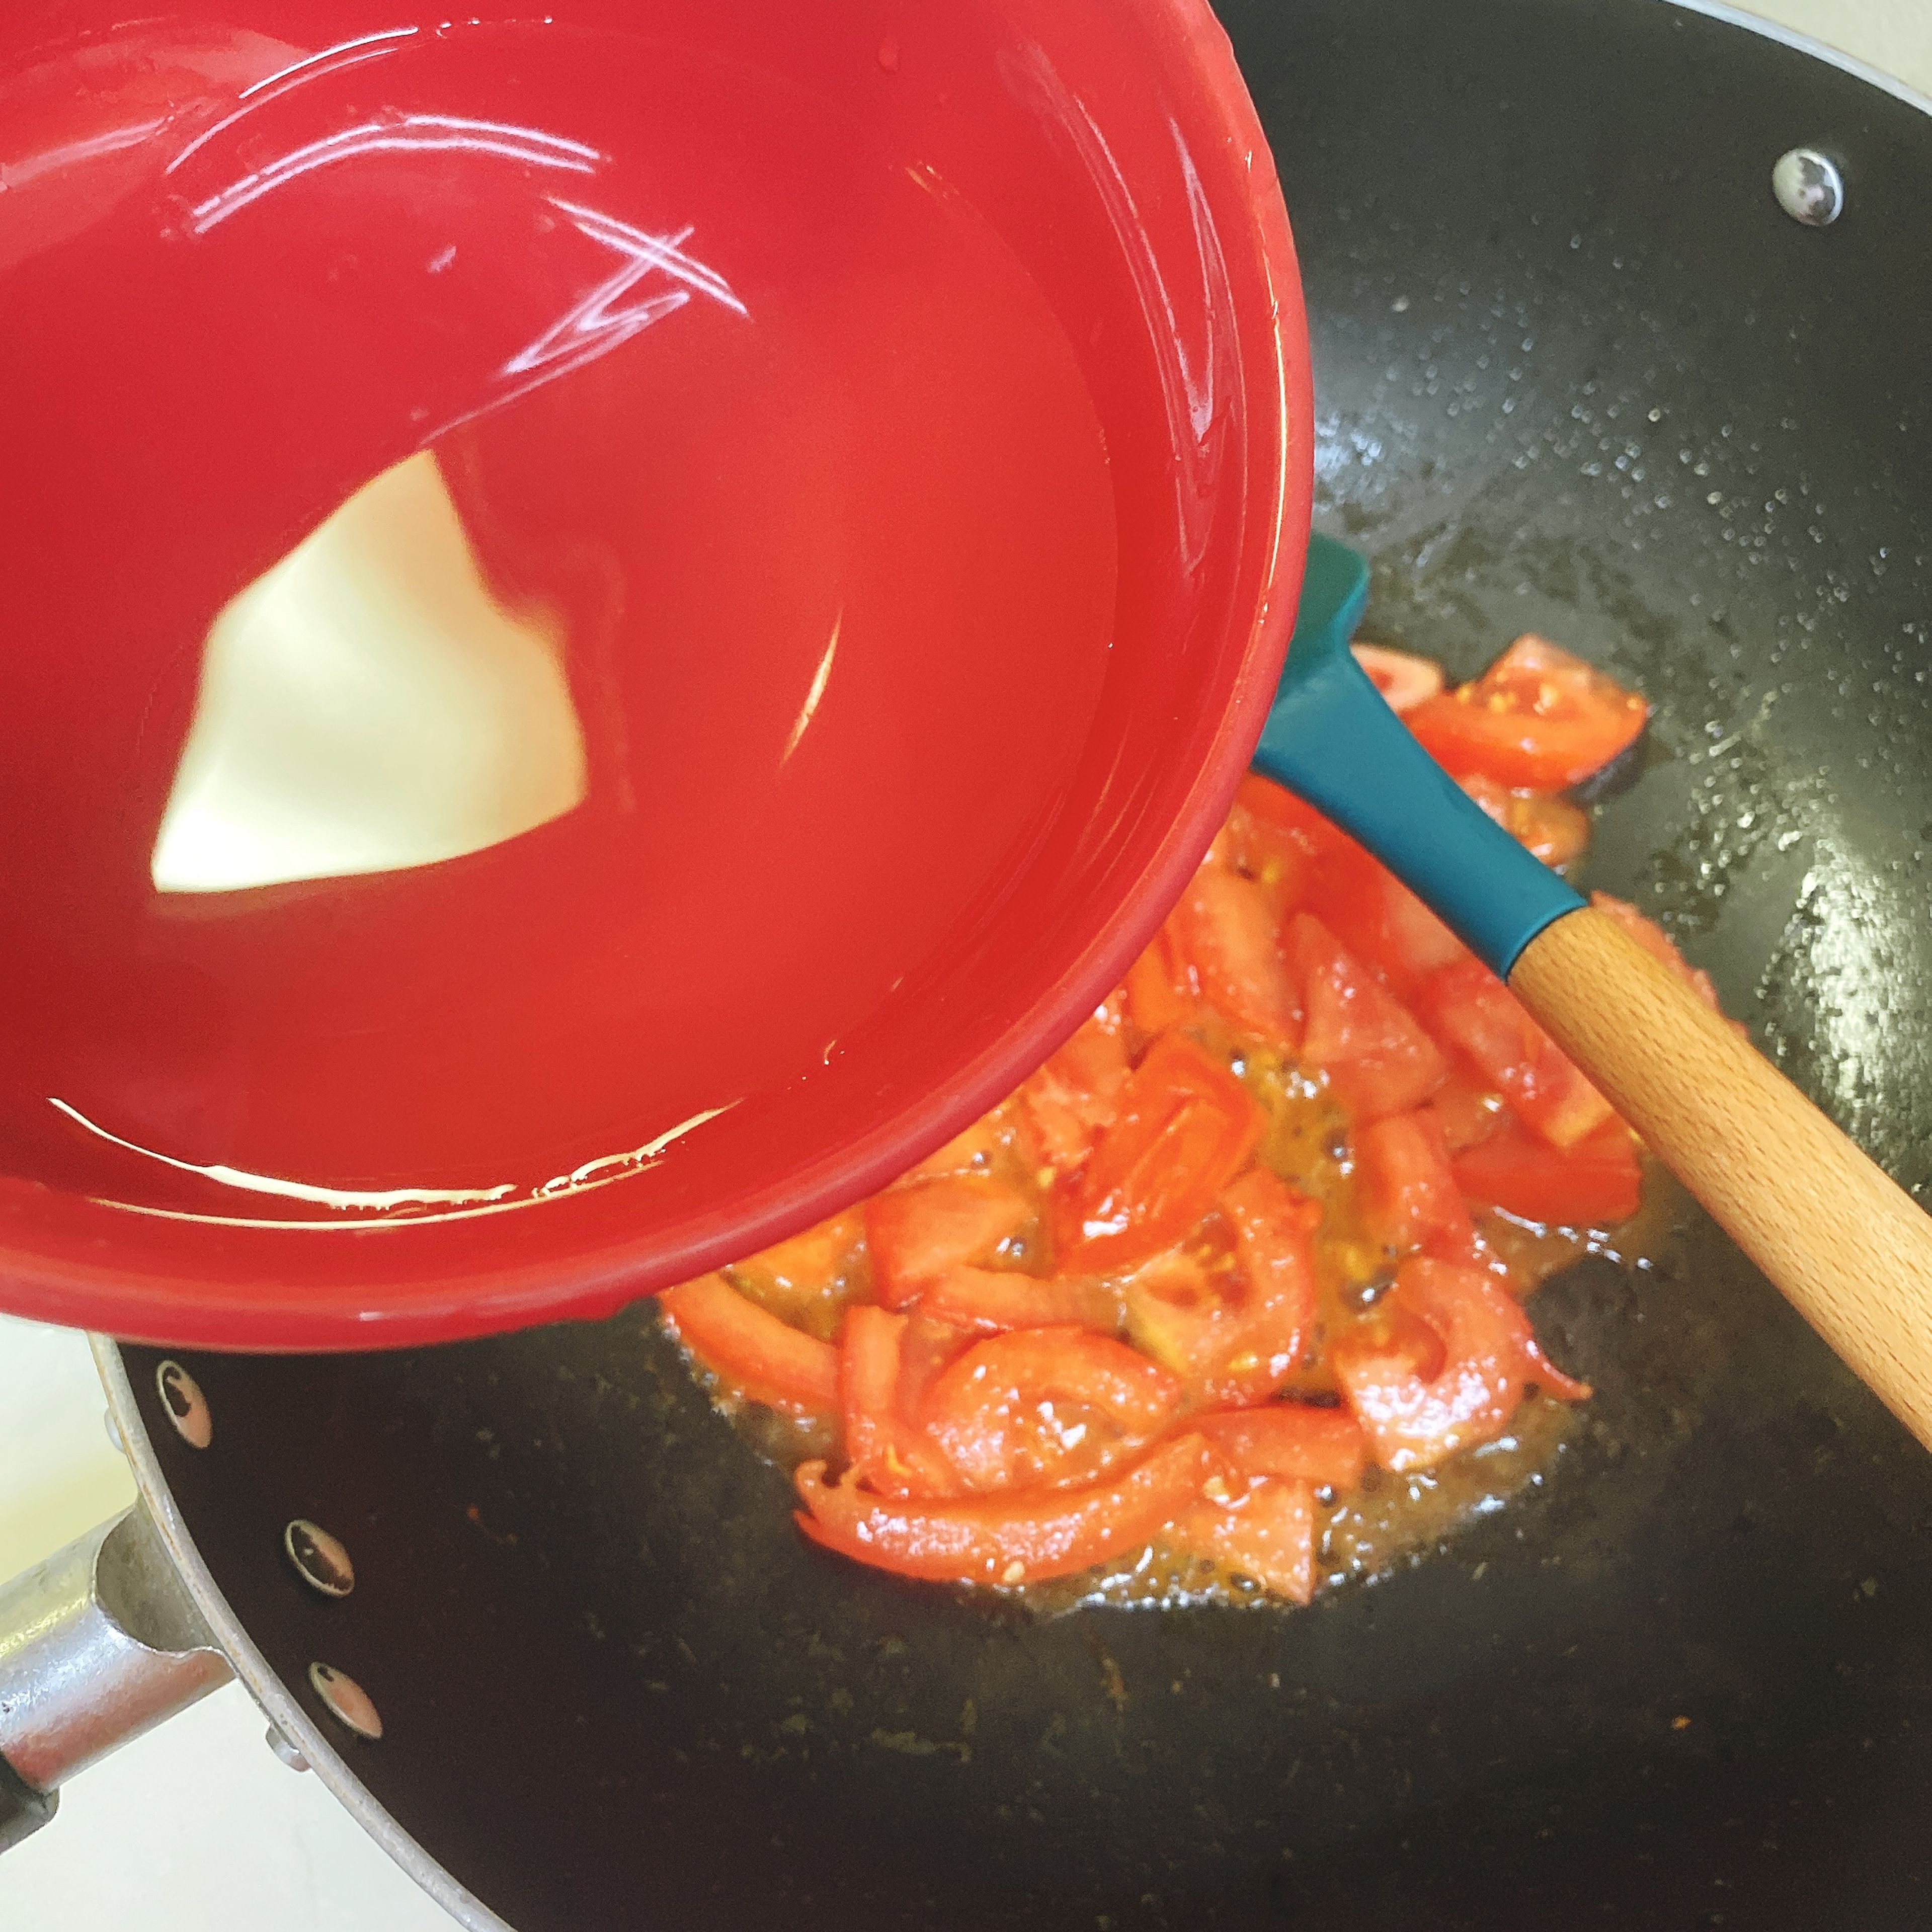 Dump the oil and no need to wash the pot. Use the residual to fry the tomato cubes until the juice is sucked out. Add half a bowl of water and wait until it boils to add the mushroom and fried tofu. Add sugar and ketchup and then put the lid on.